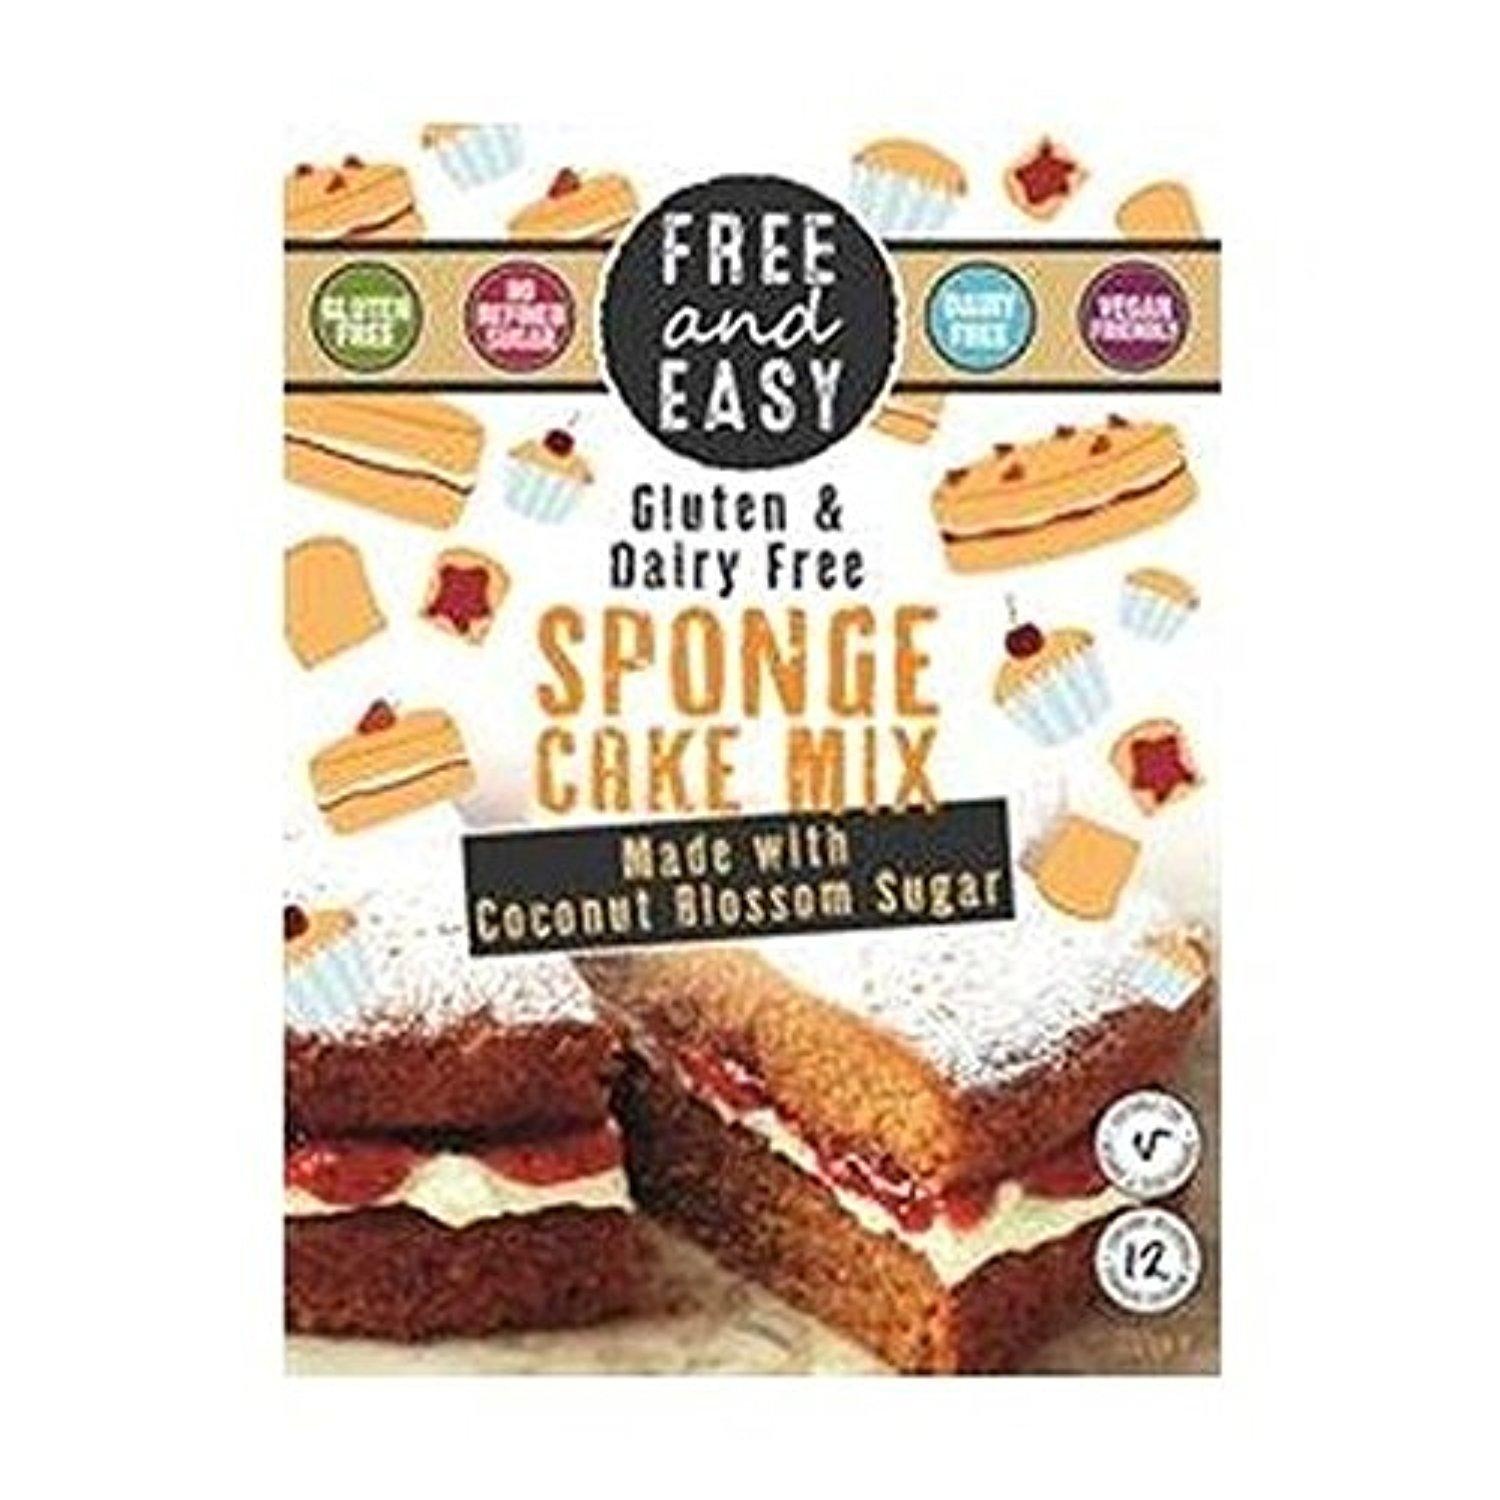 Free & Easy Sponge Cake Mix With Coconut Blossom Sugar 350g (Pack of 2)